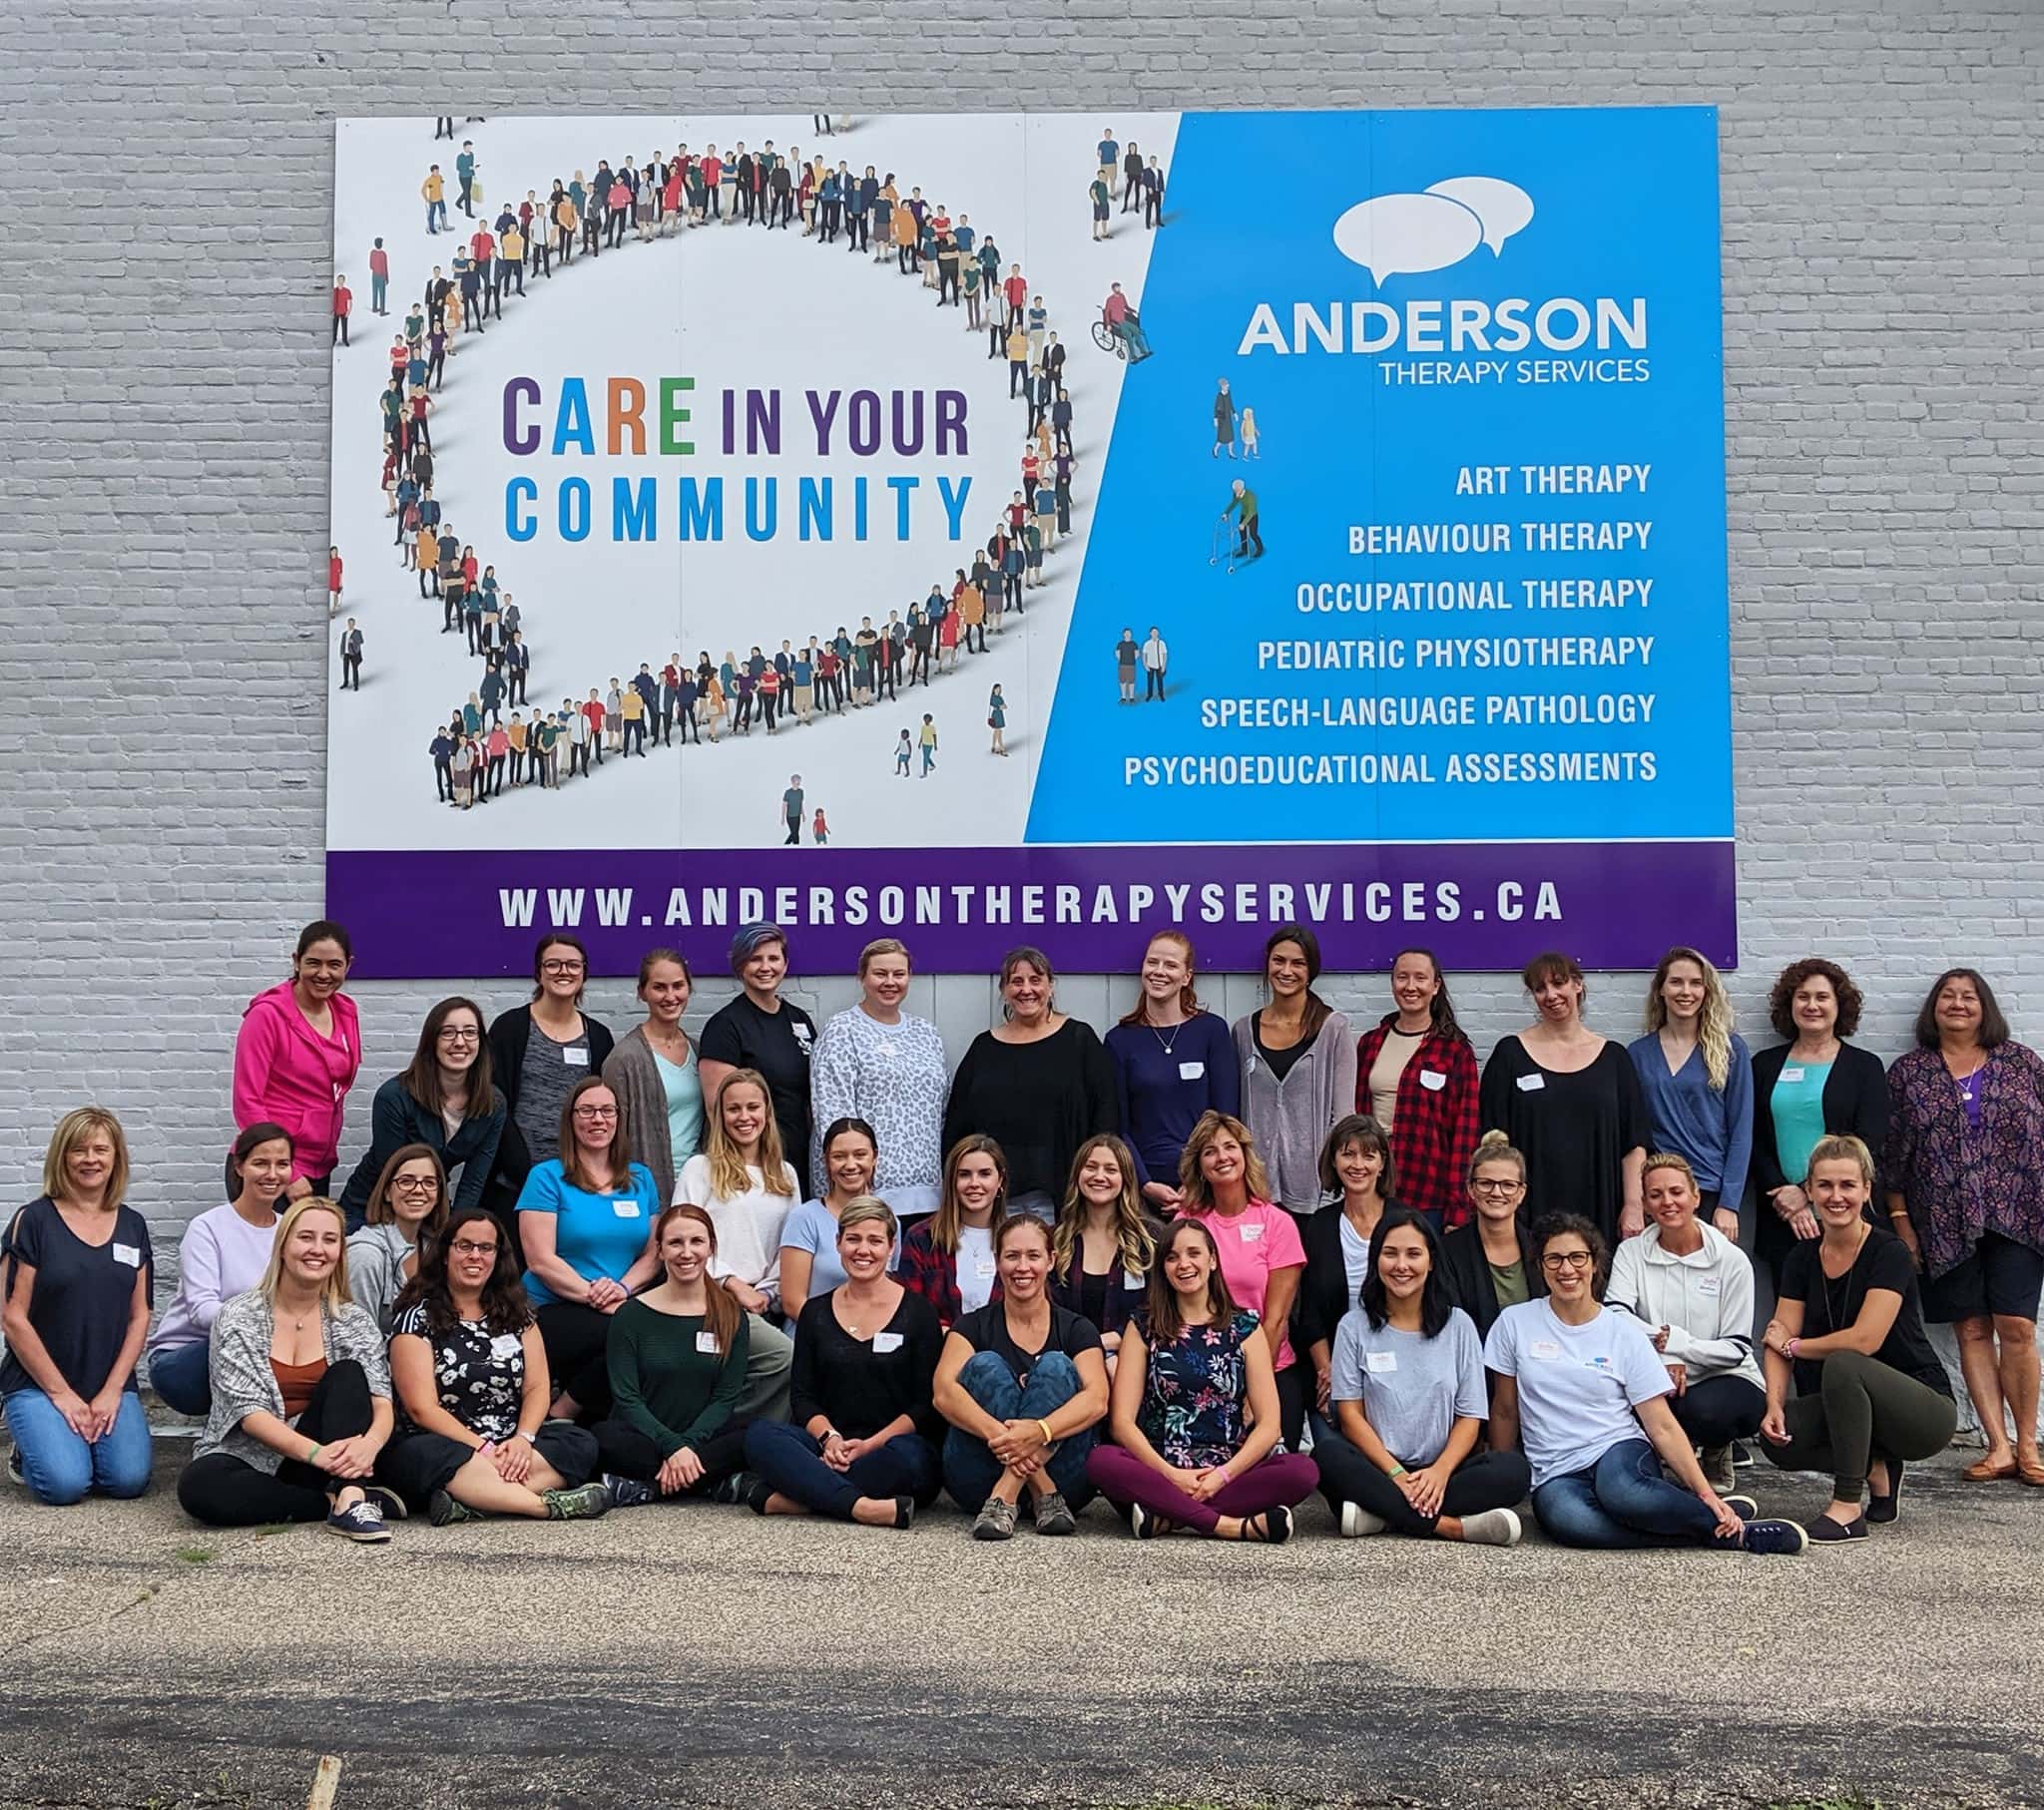 Career opportunities at Anderson Therapy Services - Team members and the culture we strive for